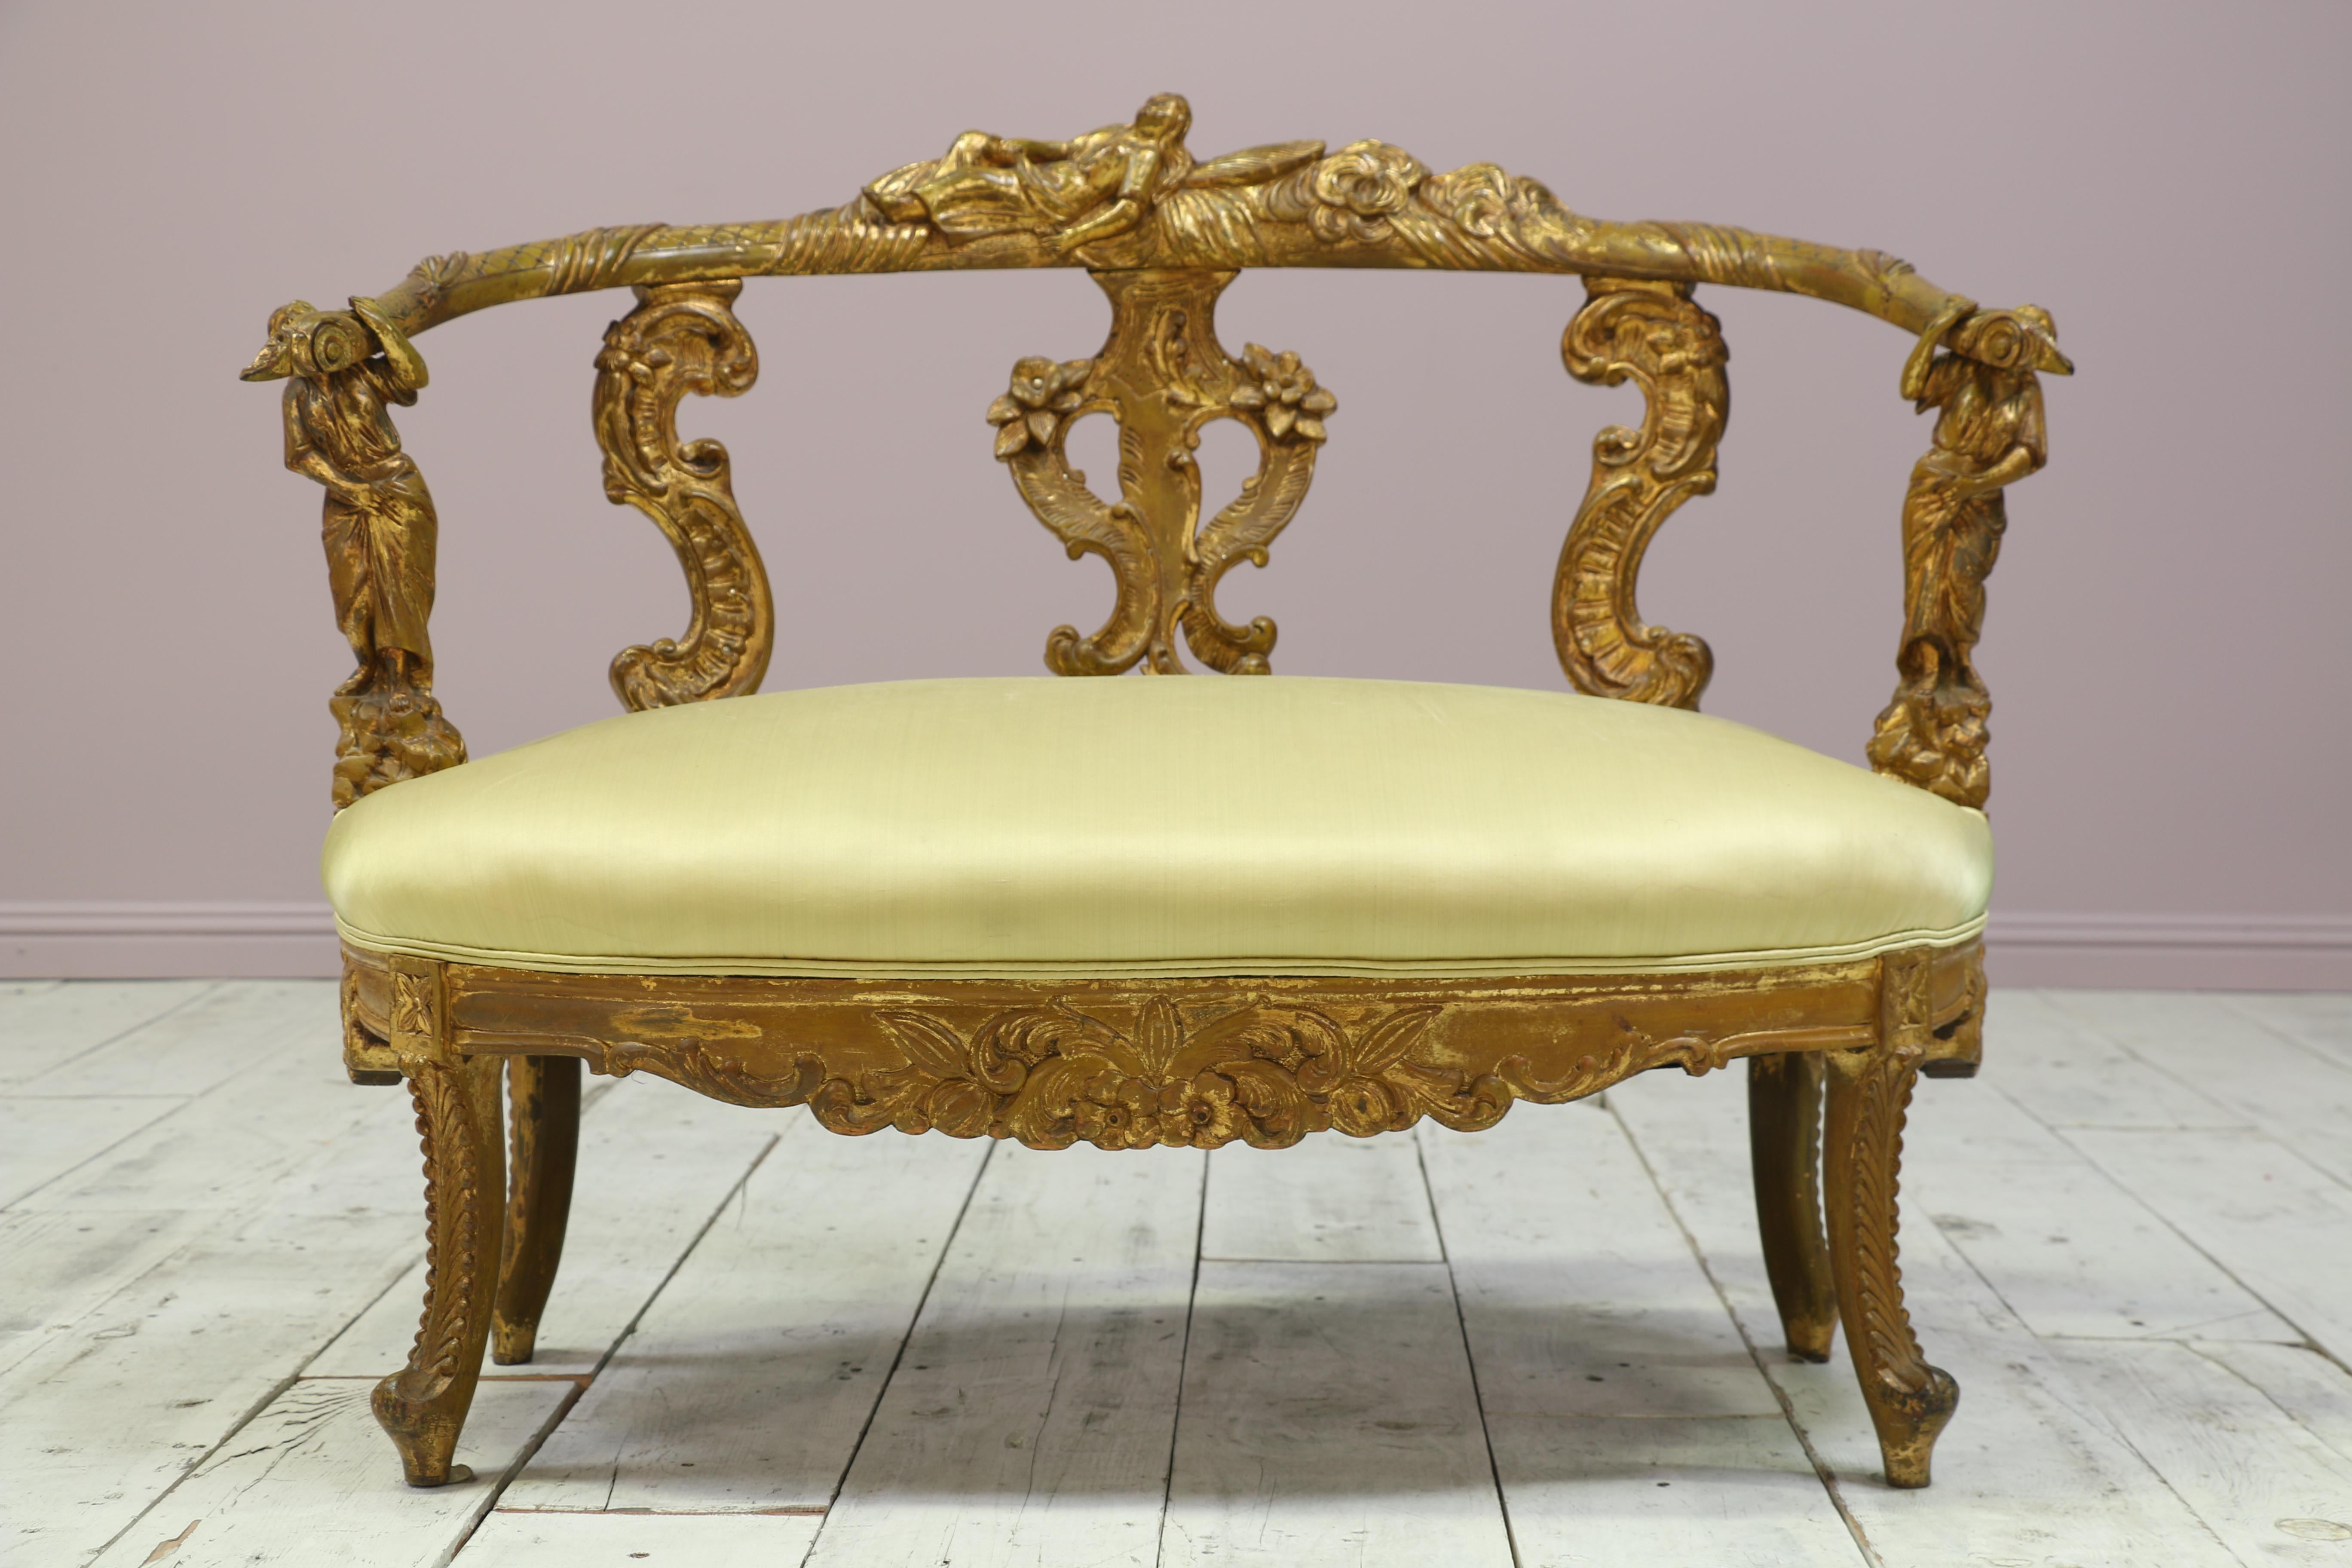 Beautiful antique Italian early 19th century carved giltwood settee and chair in the Baroque style. The chairs feature a finely carved whimsical theme including maidens, clouds, flowers and shells. Some of the flowers feature original encrusted